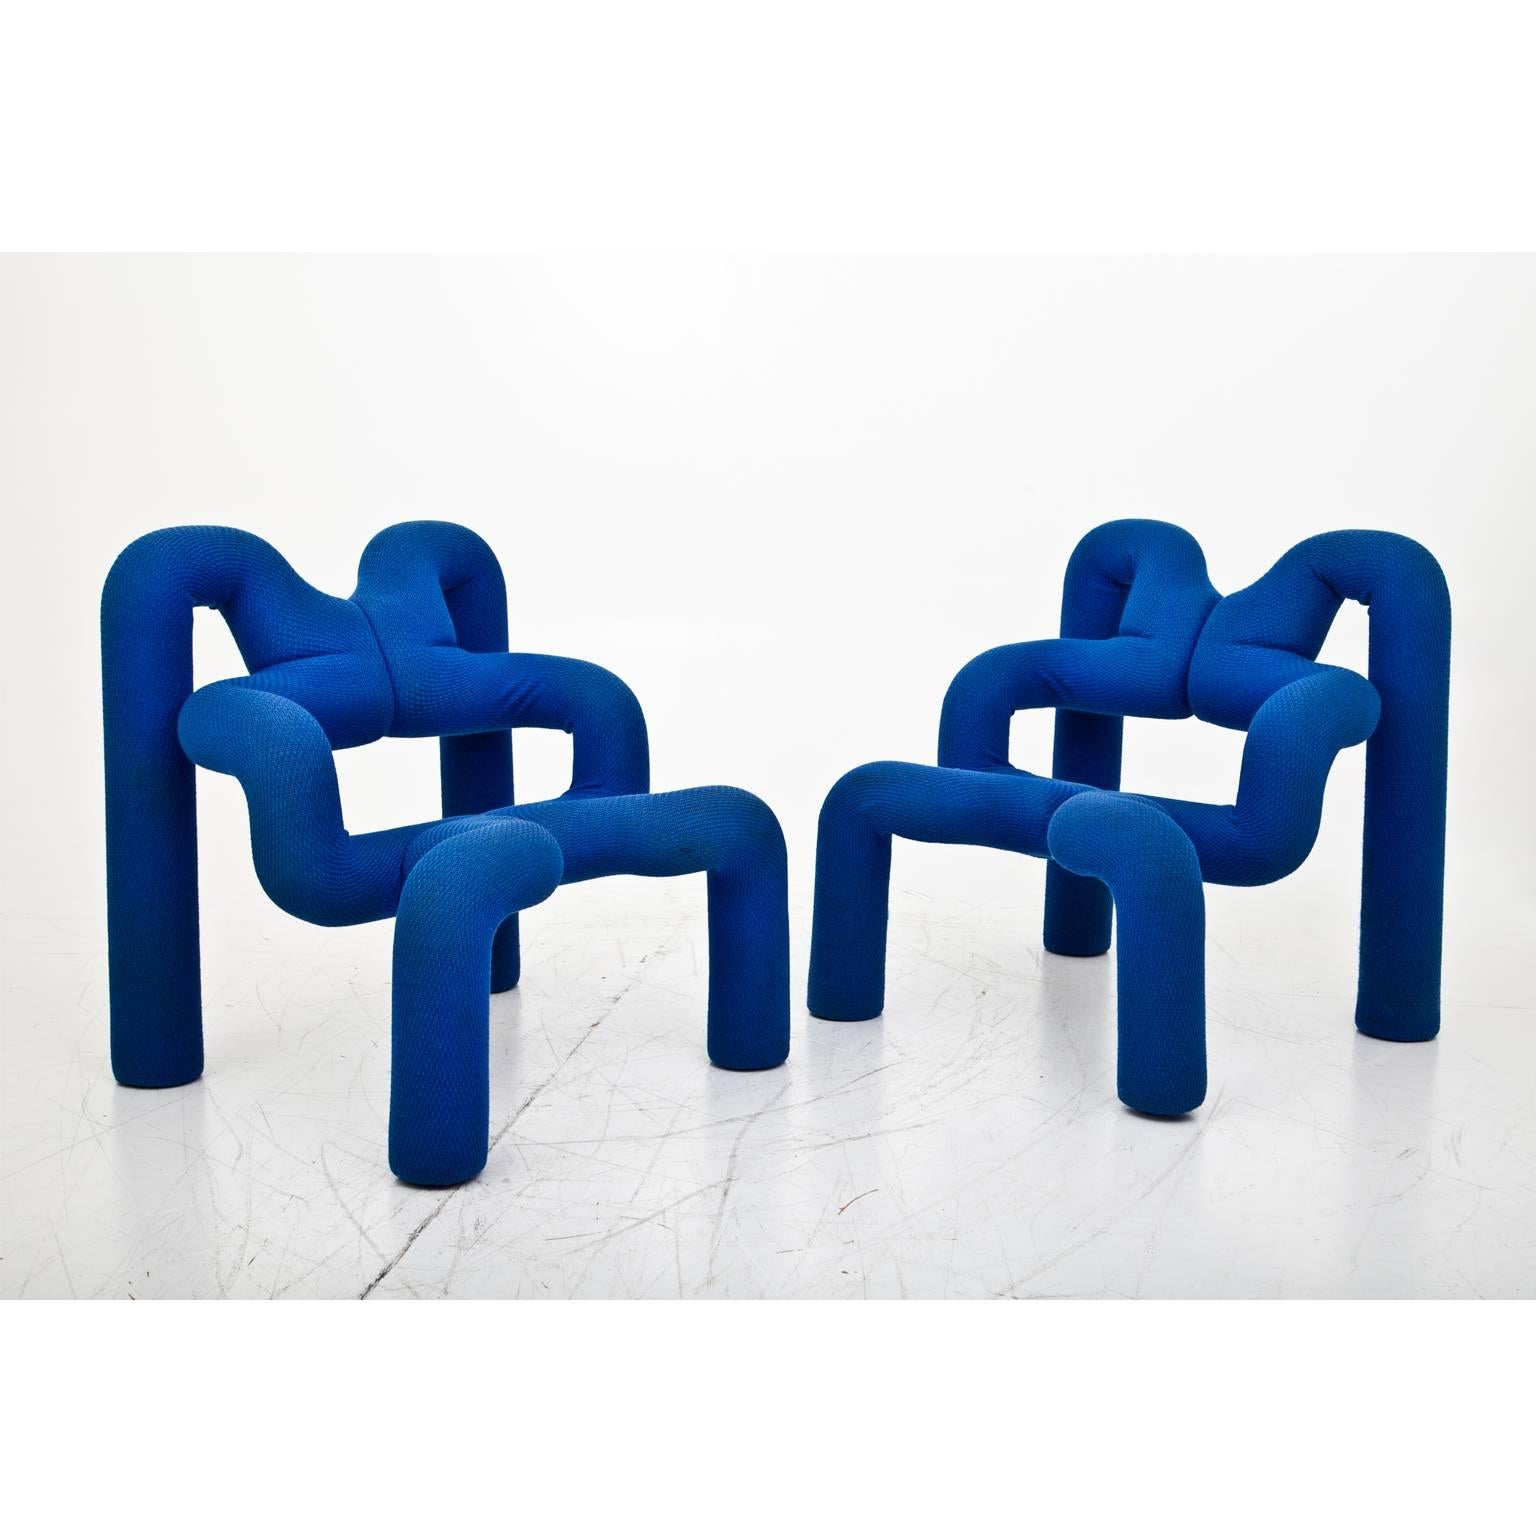 Pair of blue 'Ekstrem' lounge chairs by the Norwegian designer Terje Ekström. The model is from the year 1972, the chair was in production at Stokke Mobler since the 1980s. The fabric shows some signs of usage.